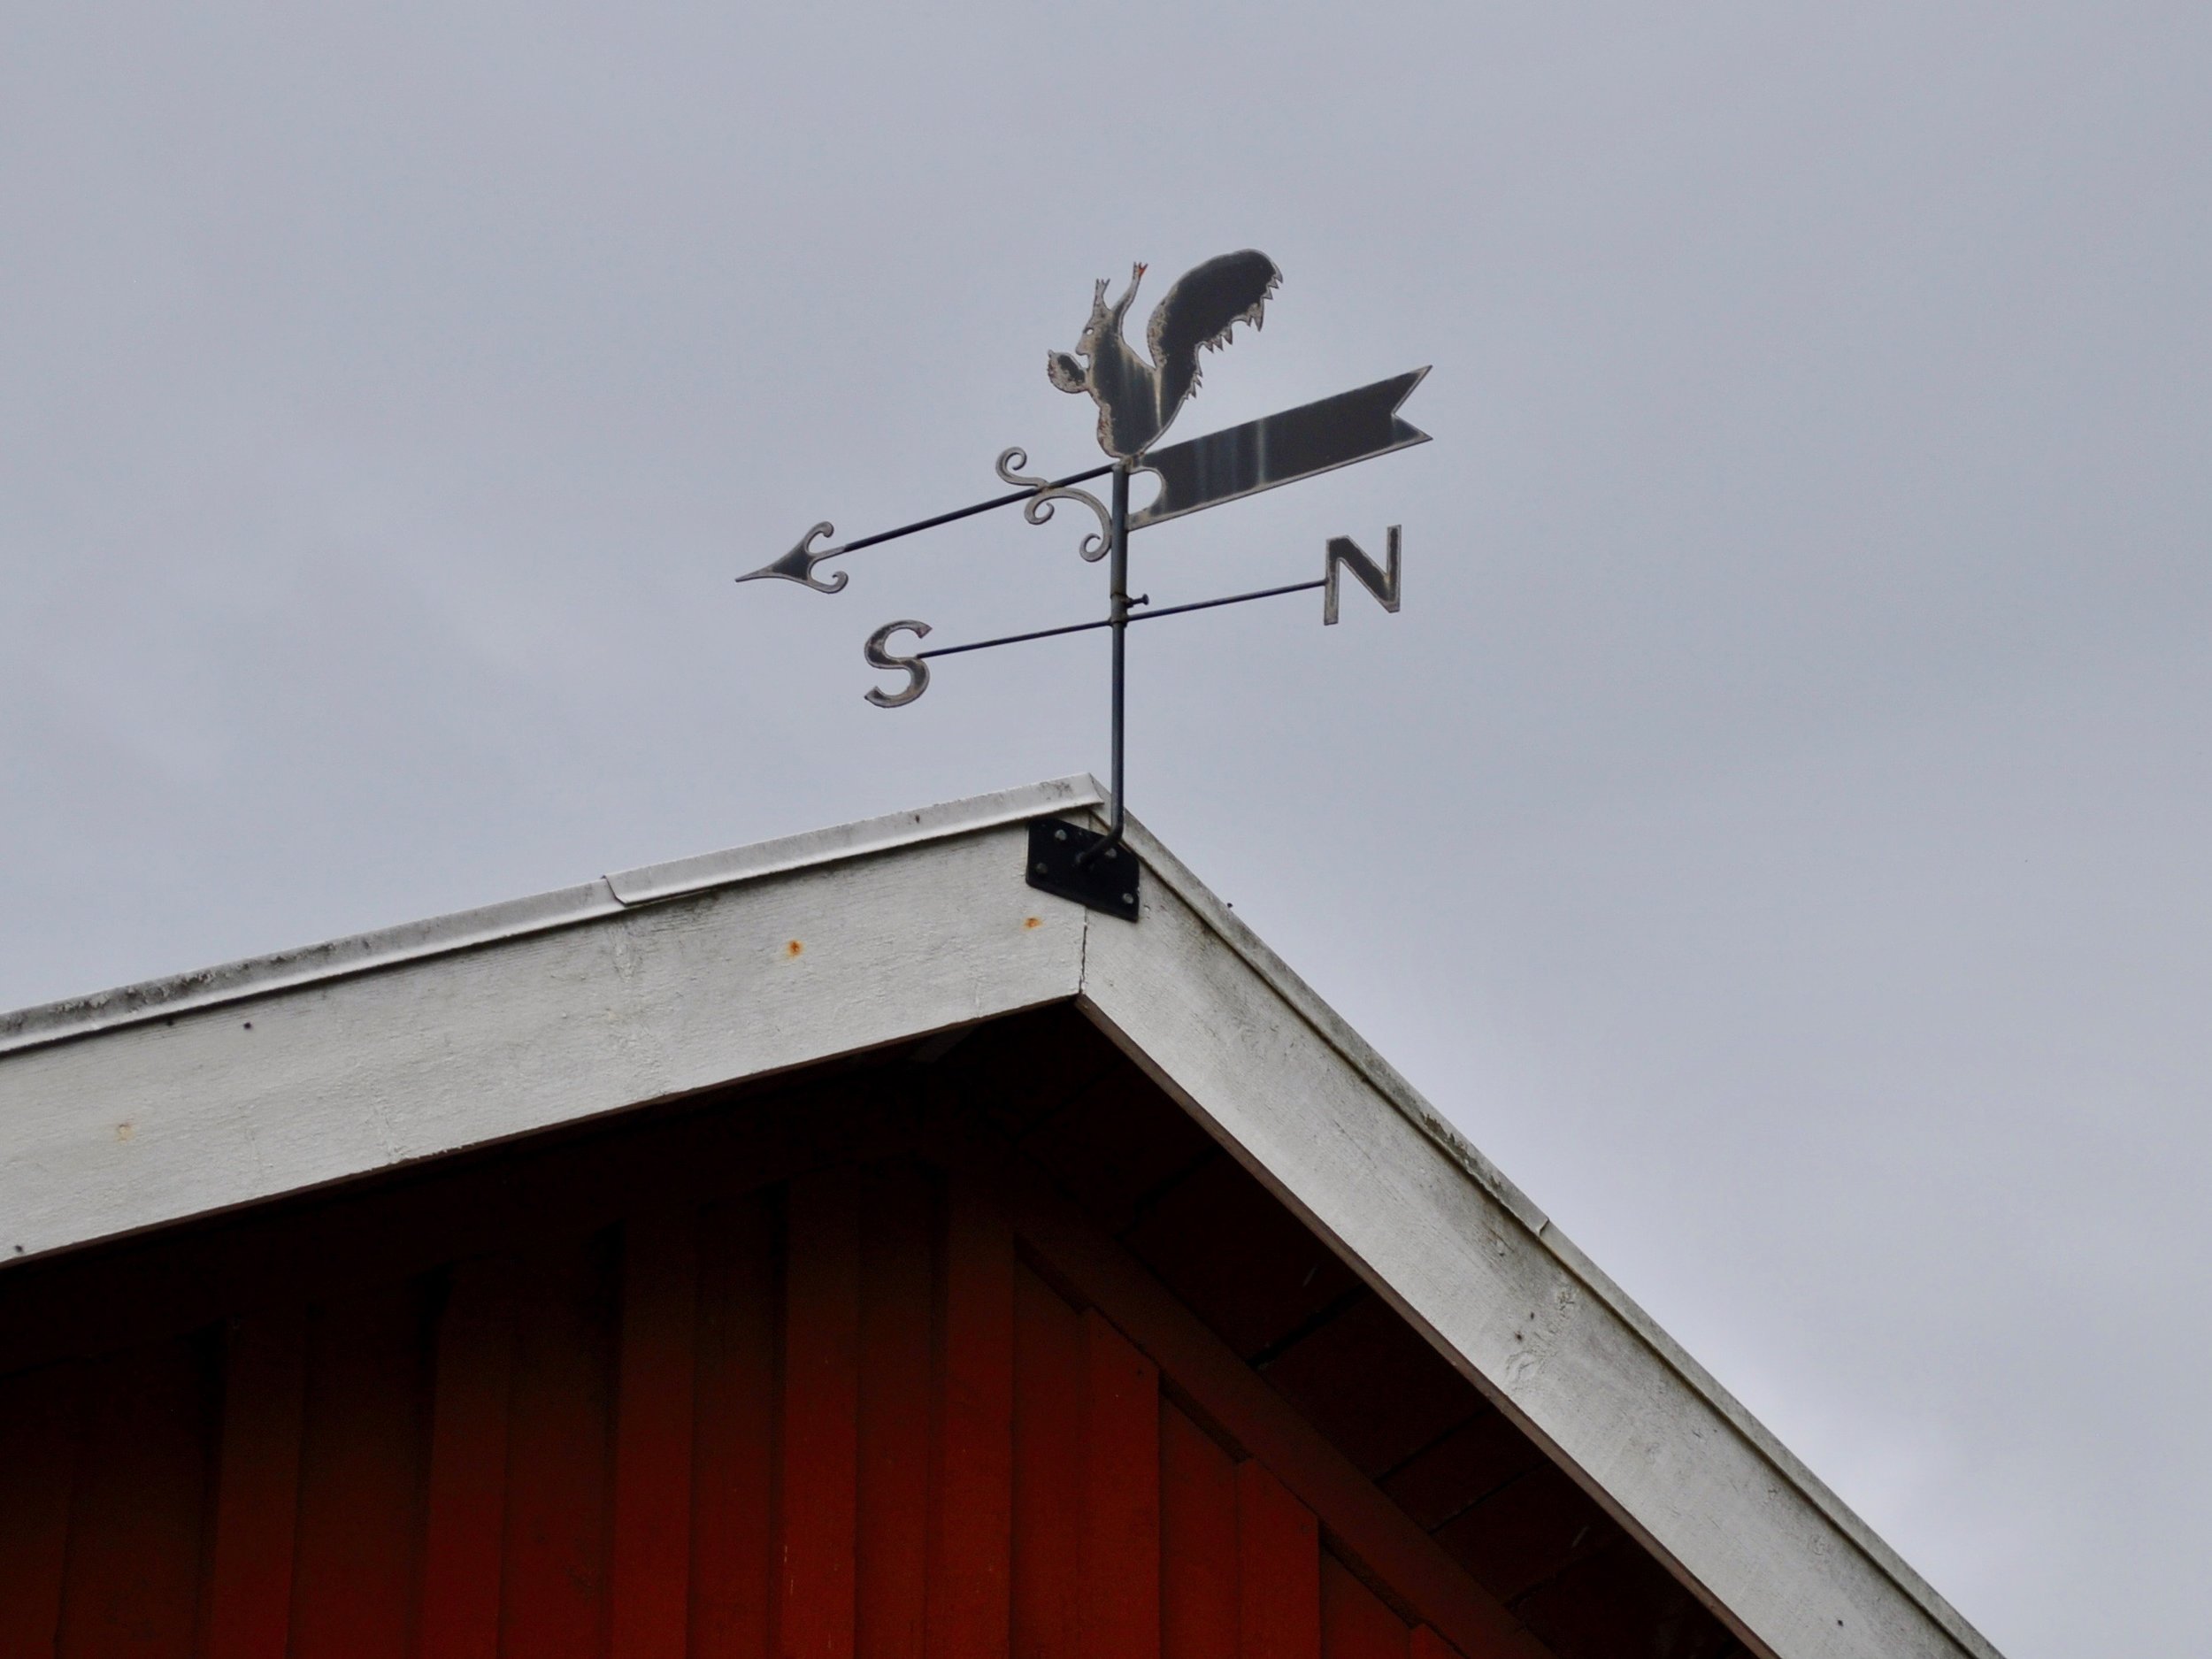 I loved this weathervane on the barn there!